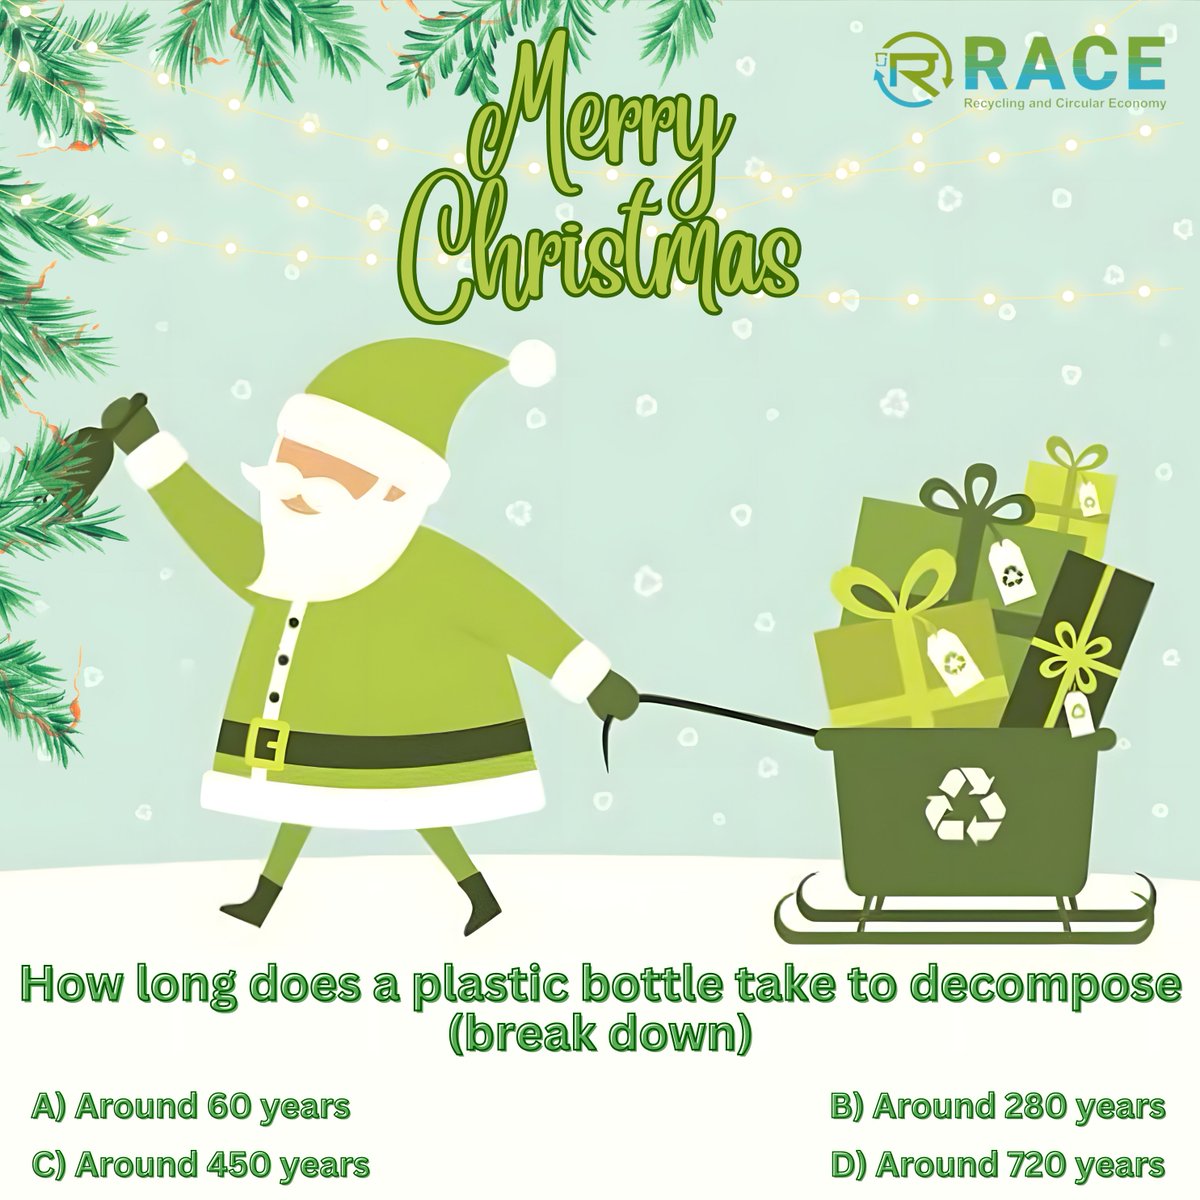 Lucky draw winner who answers it correctly will get a surprise gift...
.
Result will be declared on 30th december.
.
.
.
#happychristmas #santaquiz #quiztime #luckydraw #BeatPlasticPollution #BeTheChange #PlasticFreeFuture #raceecochain #race #recycling #recyclingindia